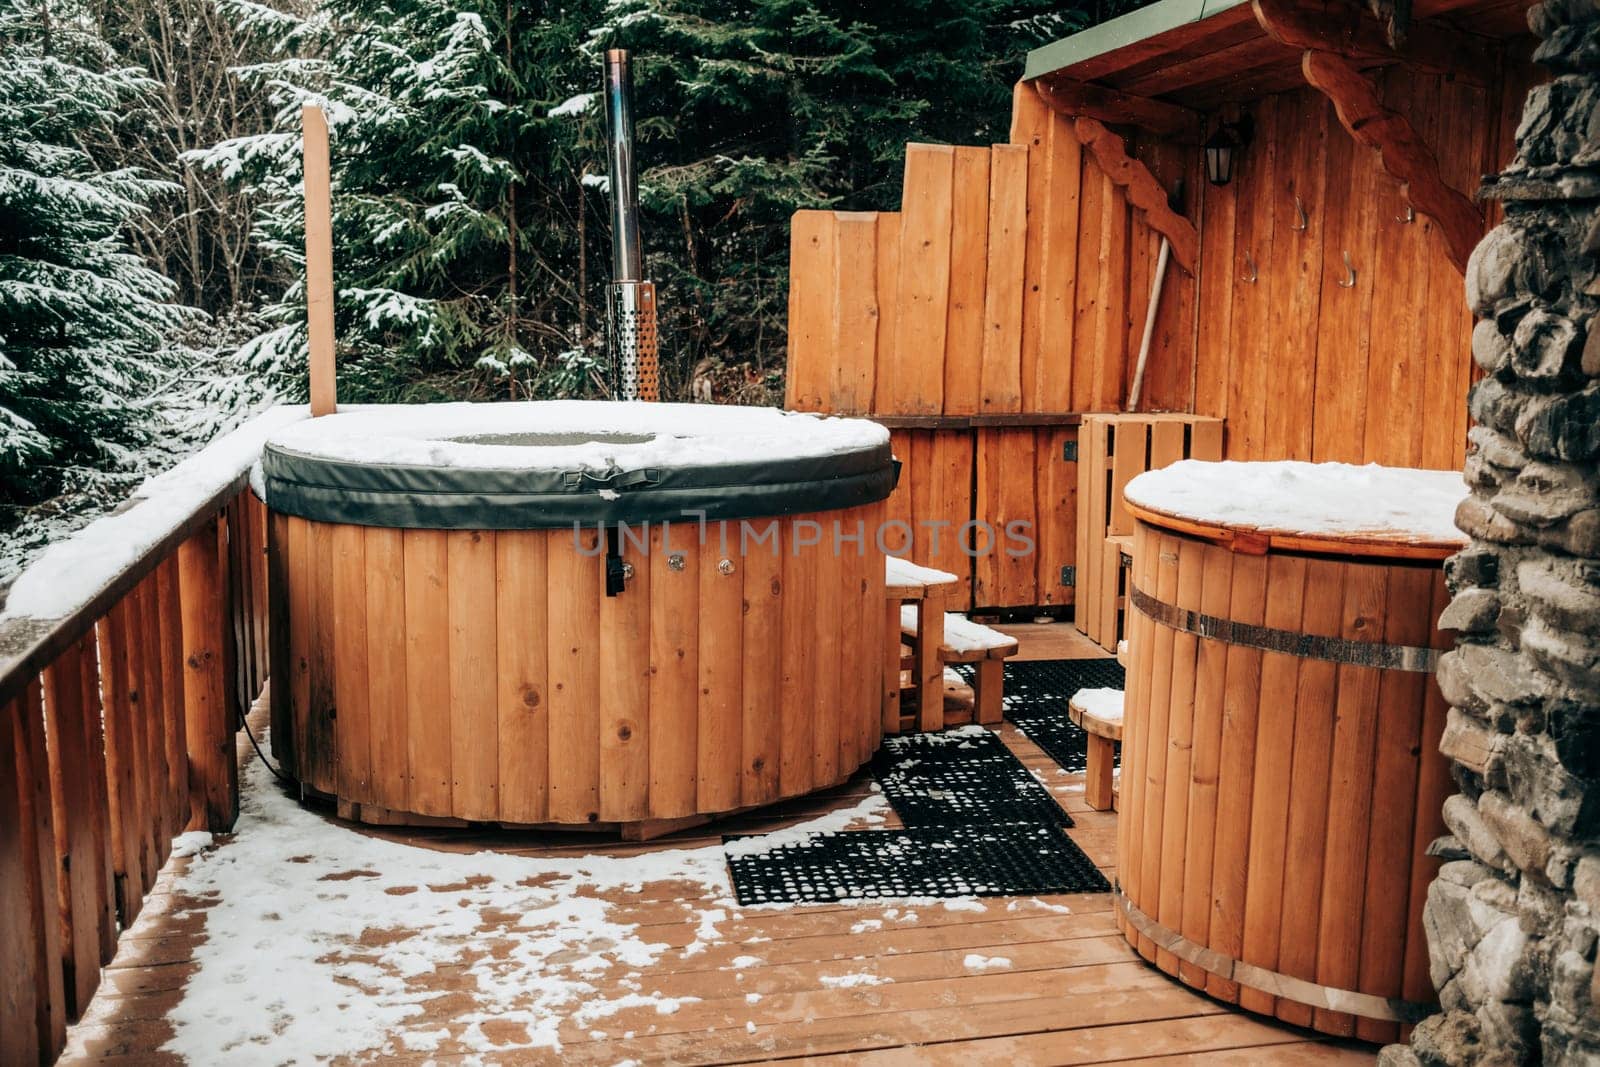 Open-air bath interior near forest, winter, snow view. Wooden hot tub outside by kristina_kokhanova